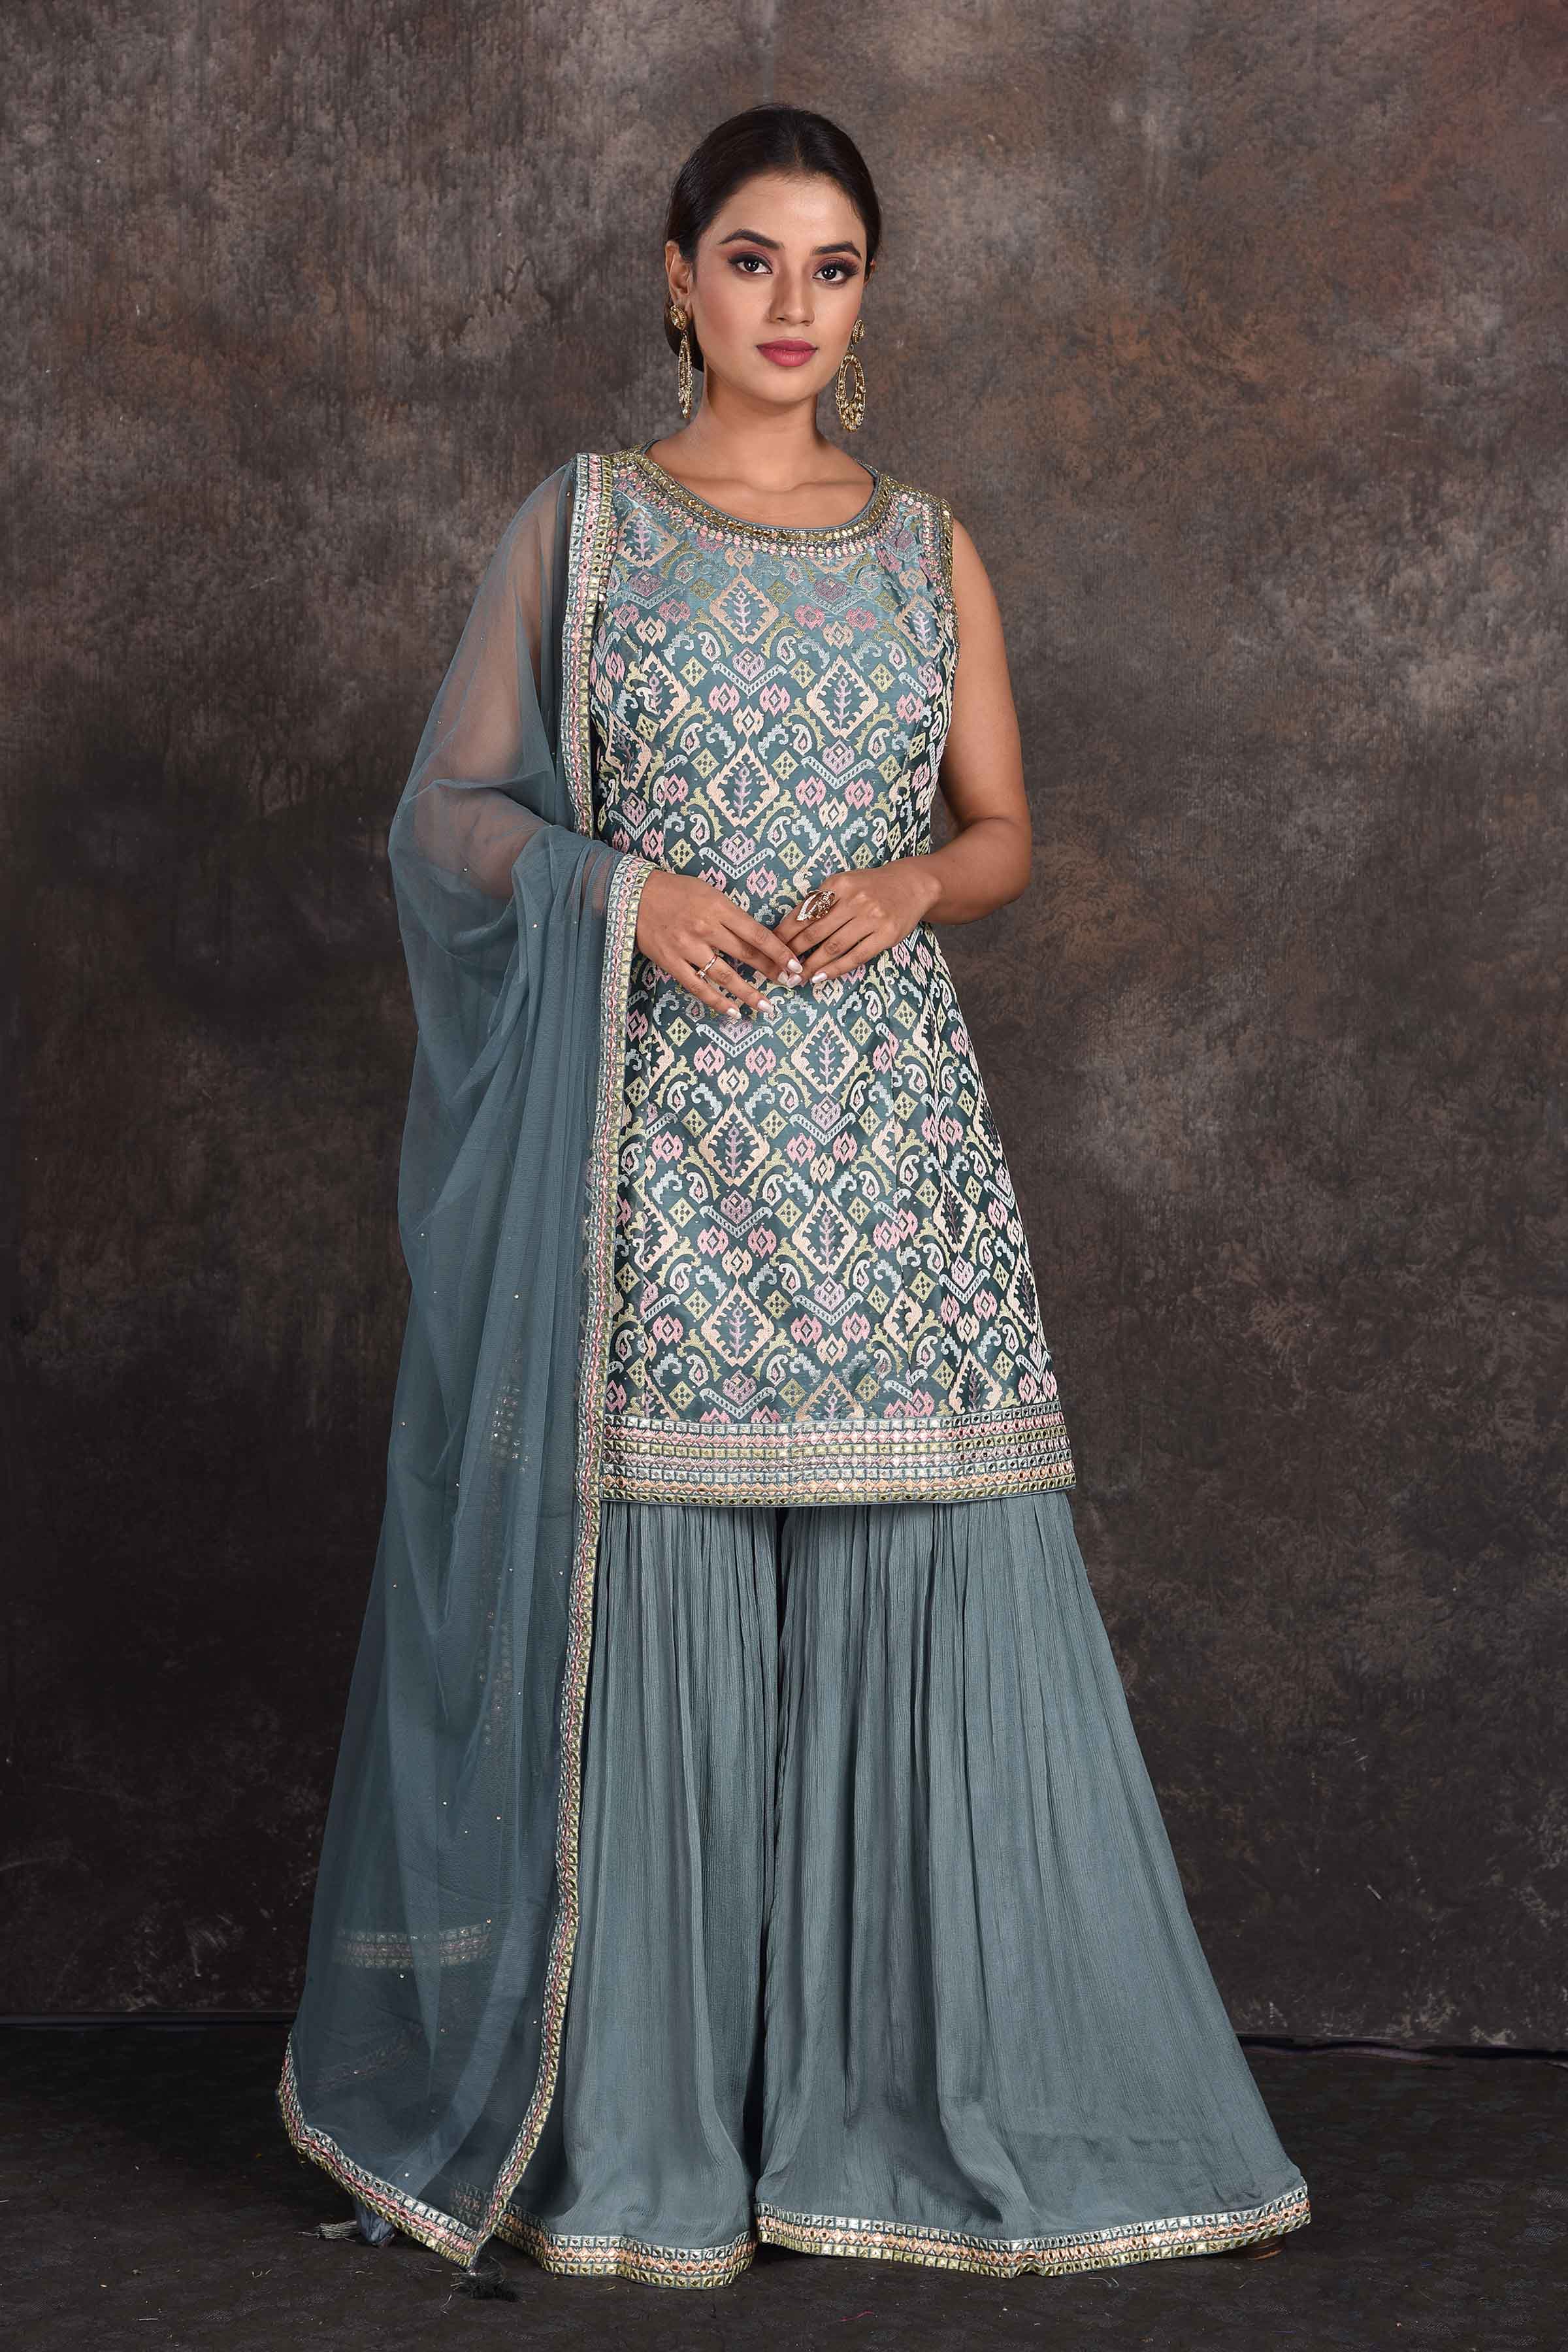 MDB 13009 ( Sharara Suits Online Usa ) | Long sleeve chiffon maxi dress,  Boutique style dresses, Indian suits for women